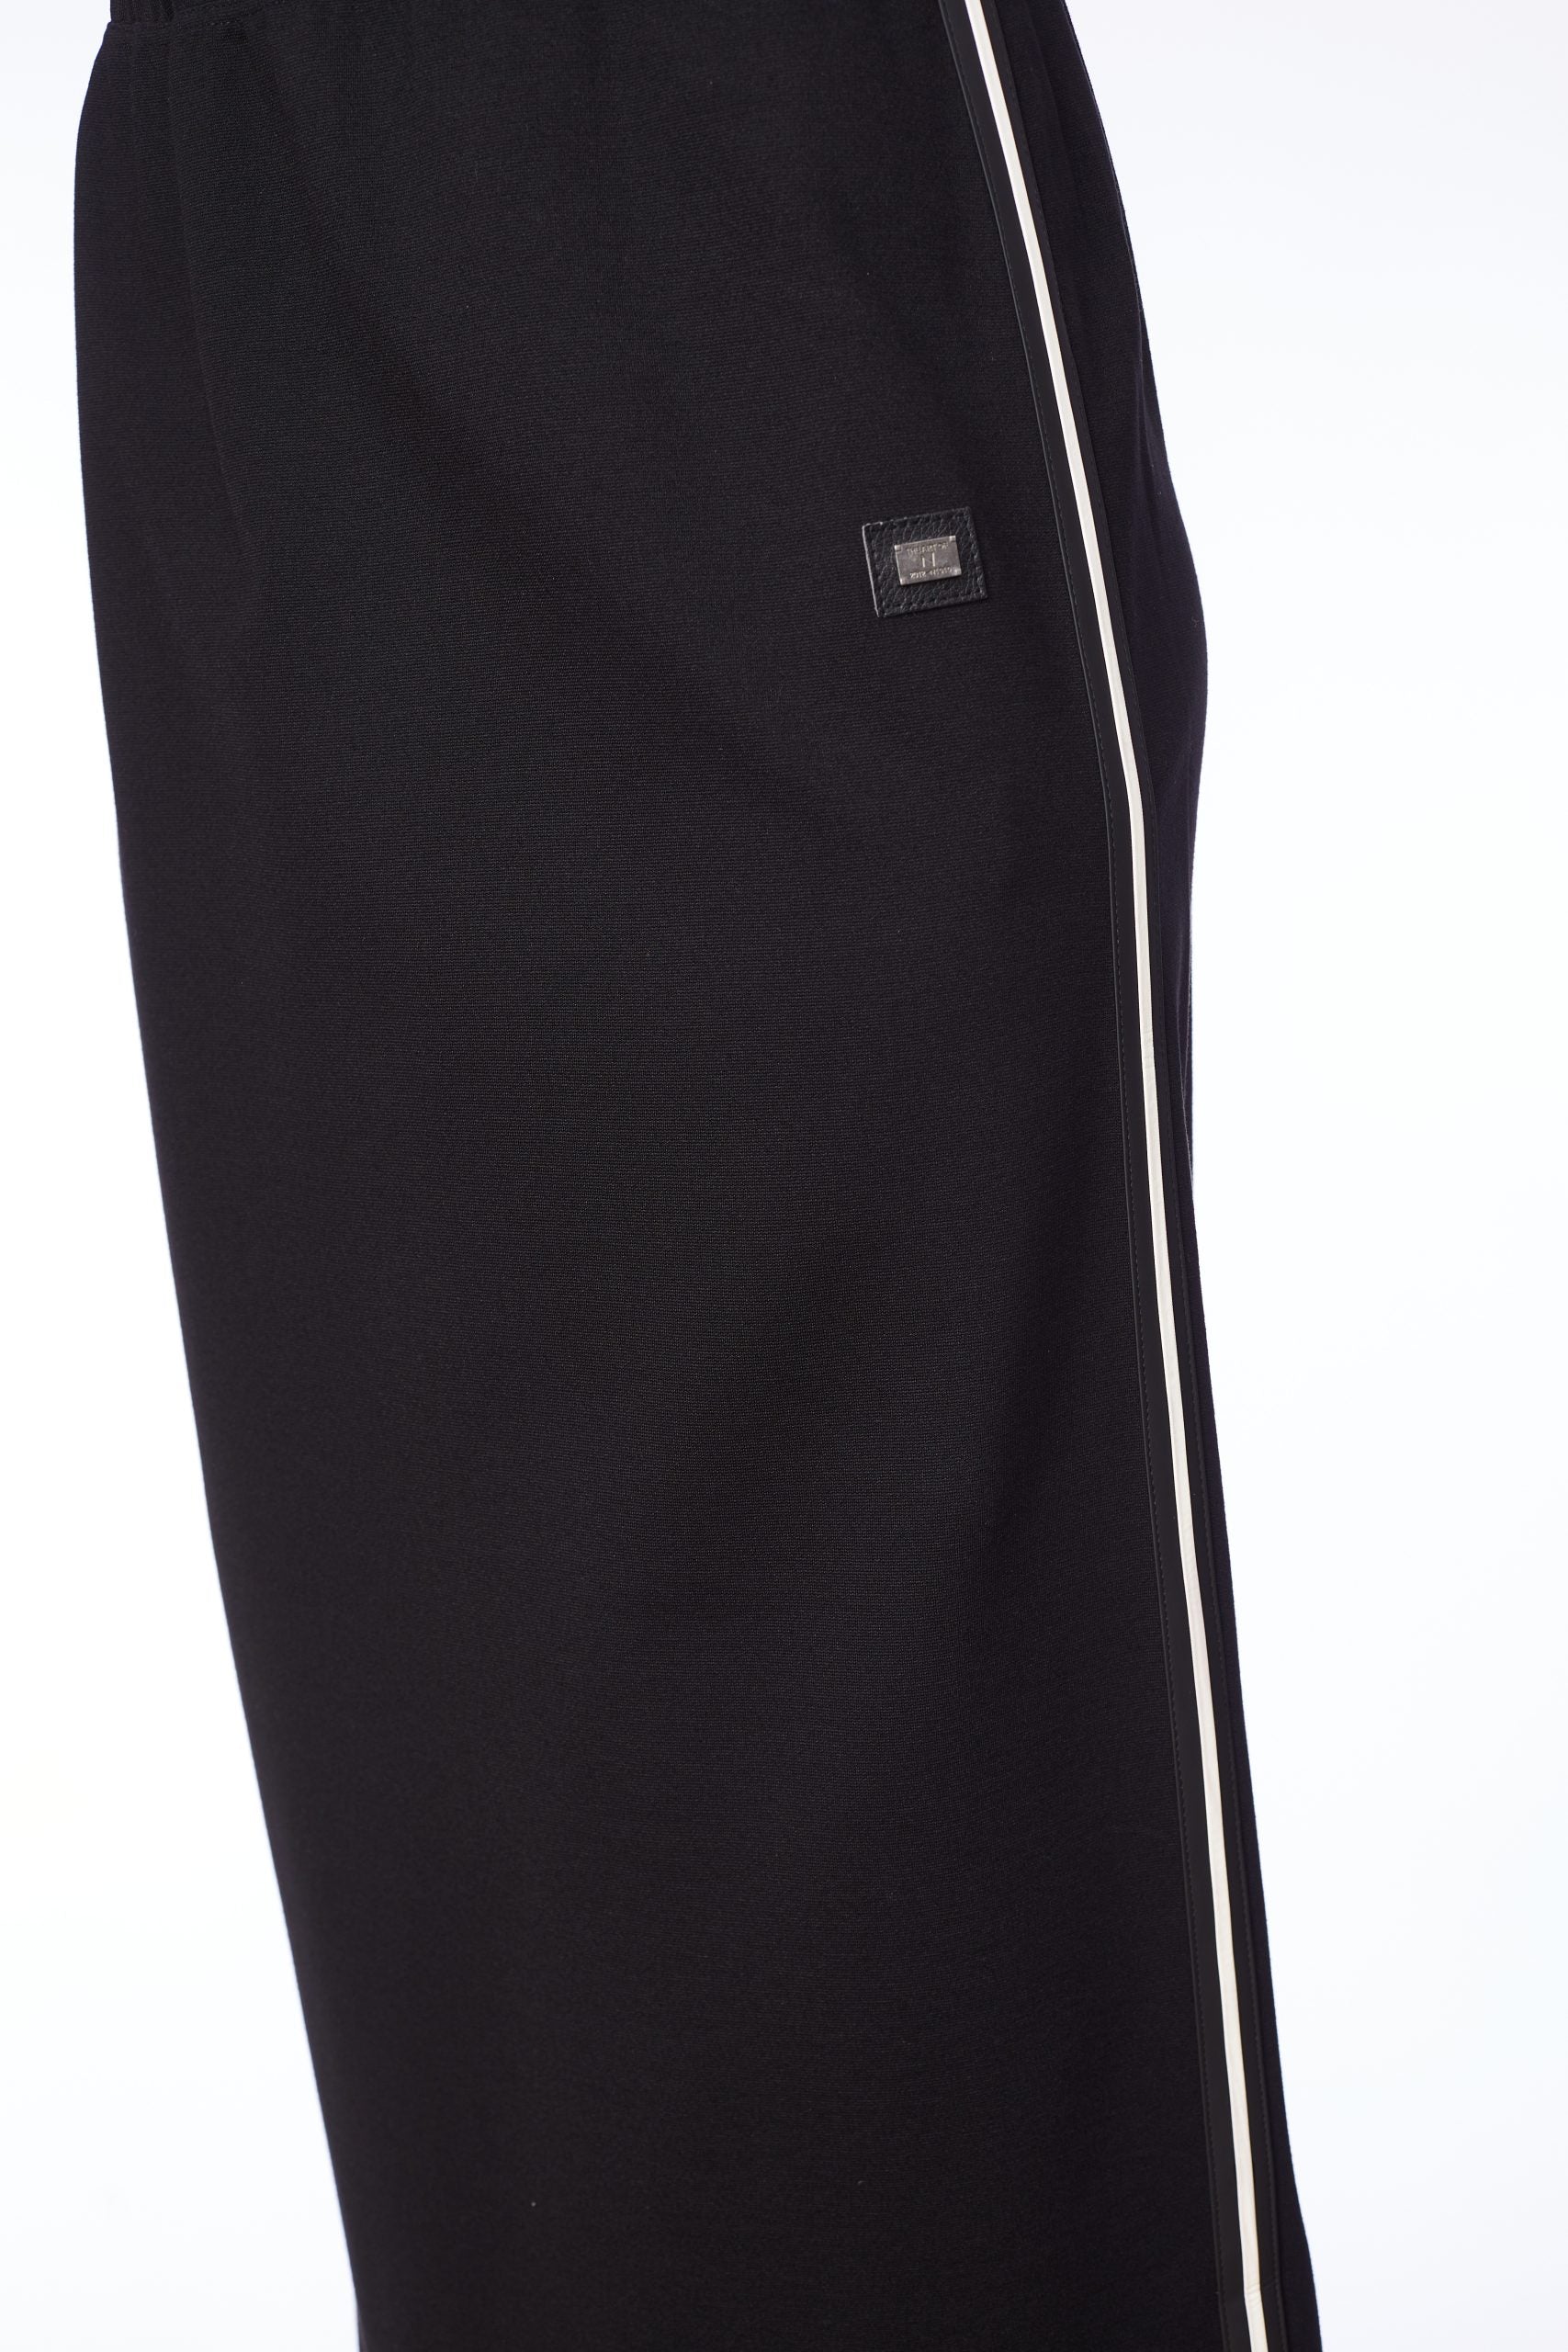 Straight Skirt with Trim in Black/White